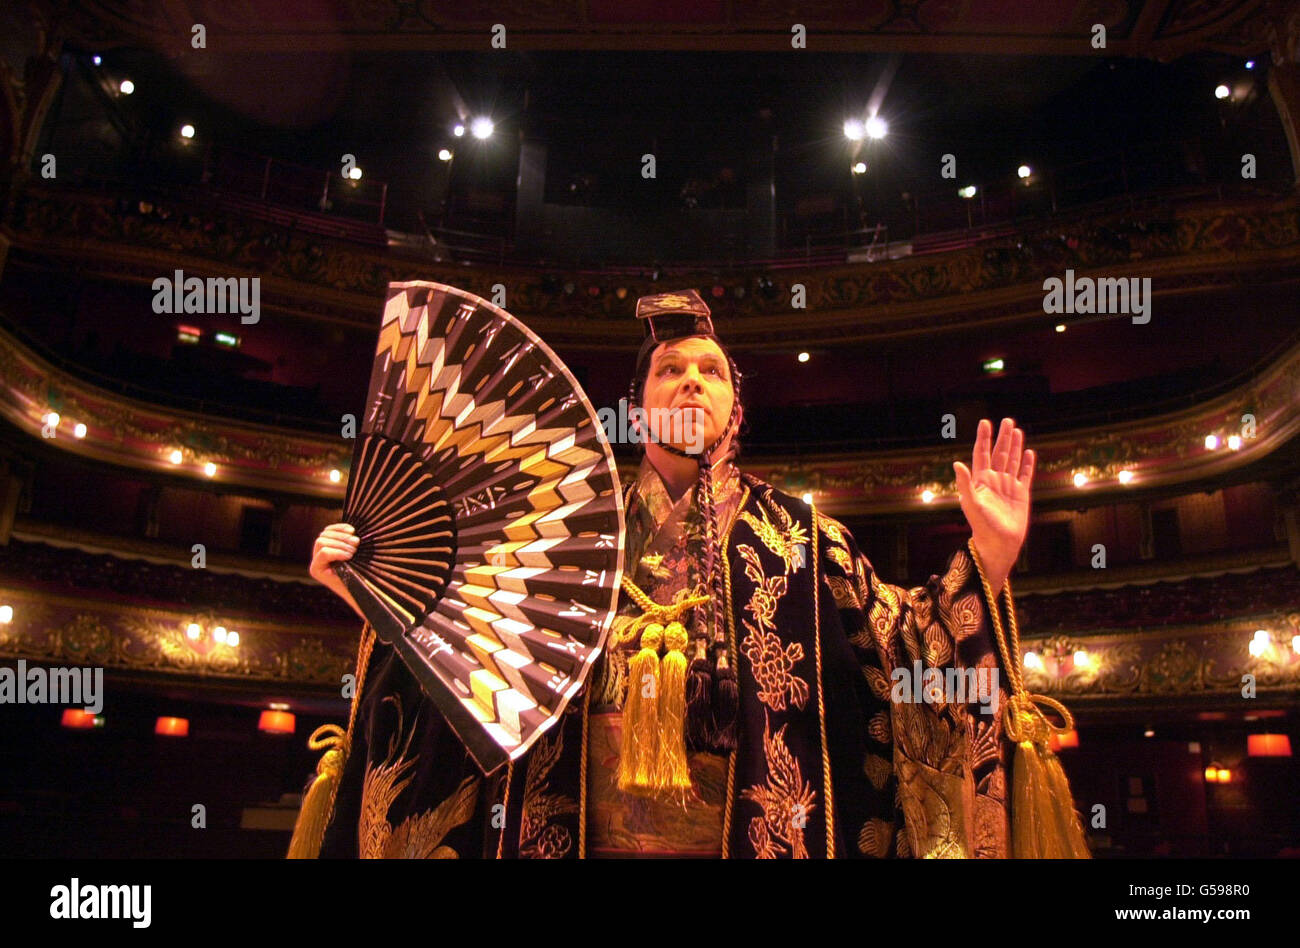 Actor Peter Ellis in the dress rehearsal of The Mikado at The Hackney Empire. He is best known as Chief Inspector Brownlow from ITV's 'The Bill' and will play the title role of the Mikado in this production when it tours Australia and New Zealand. * ...from June to September 2001. Stock Photo